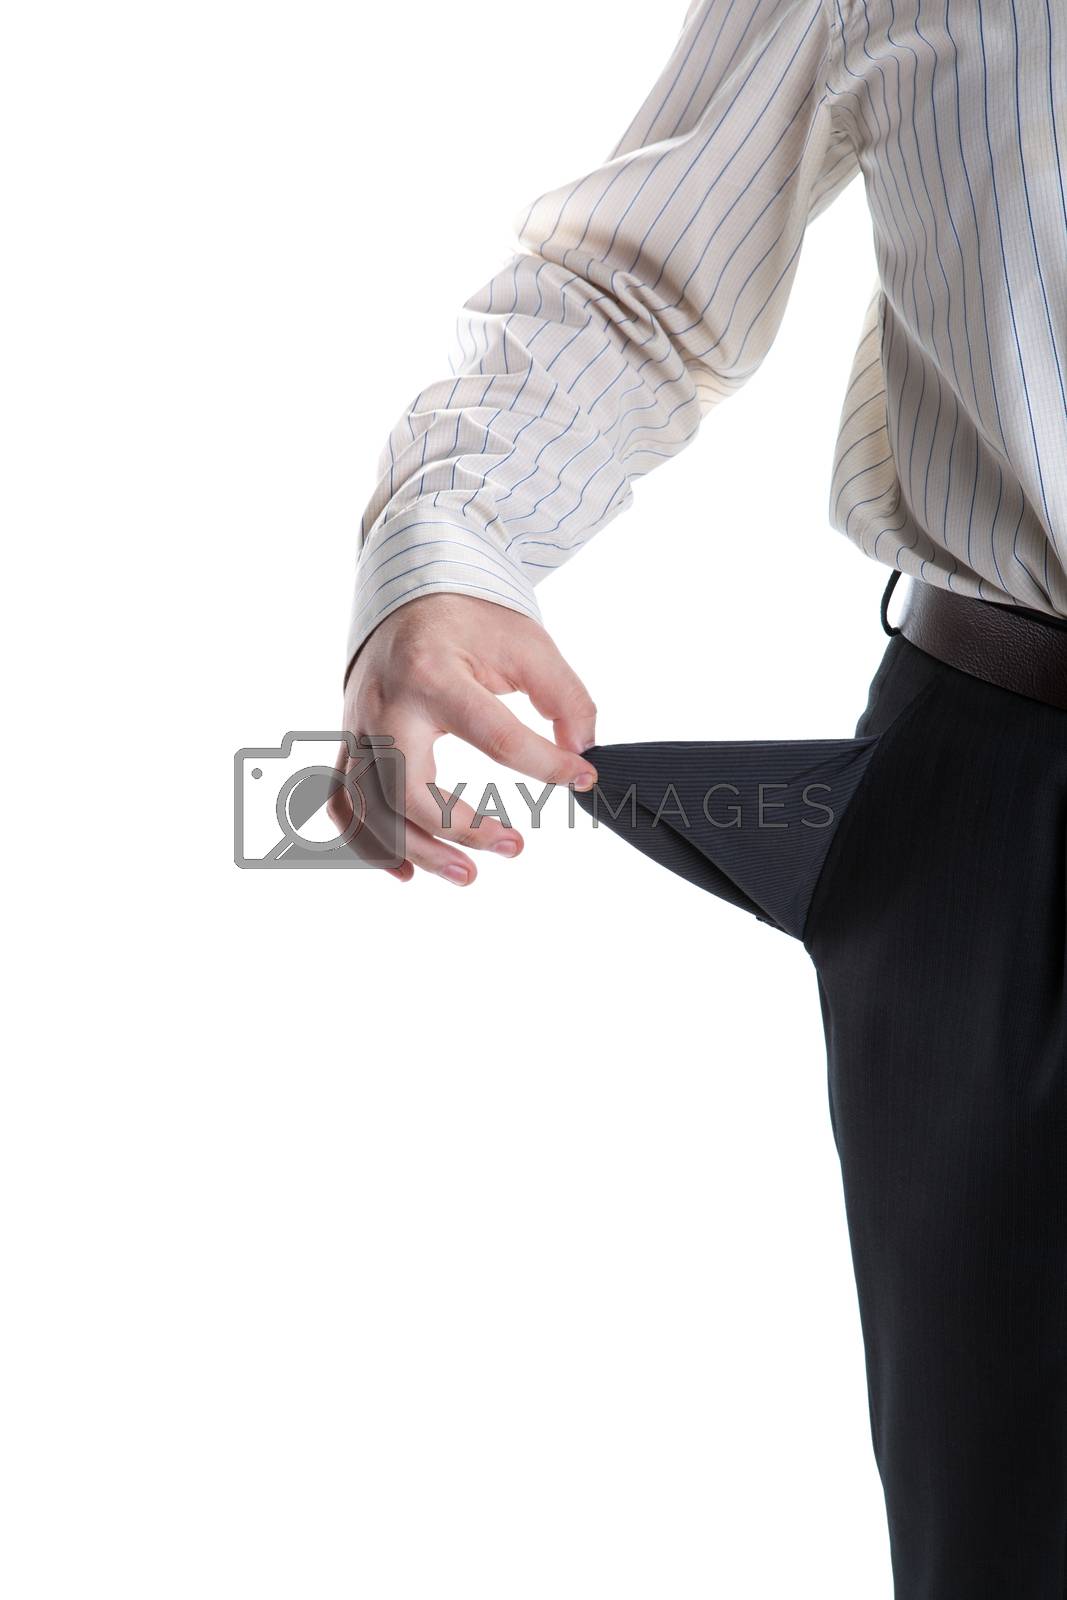 Royalty free image of man's hand turns empty pocket by mizar_21984